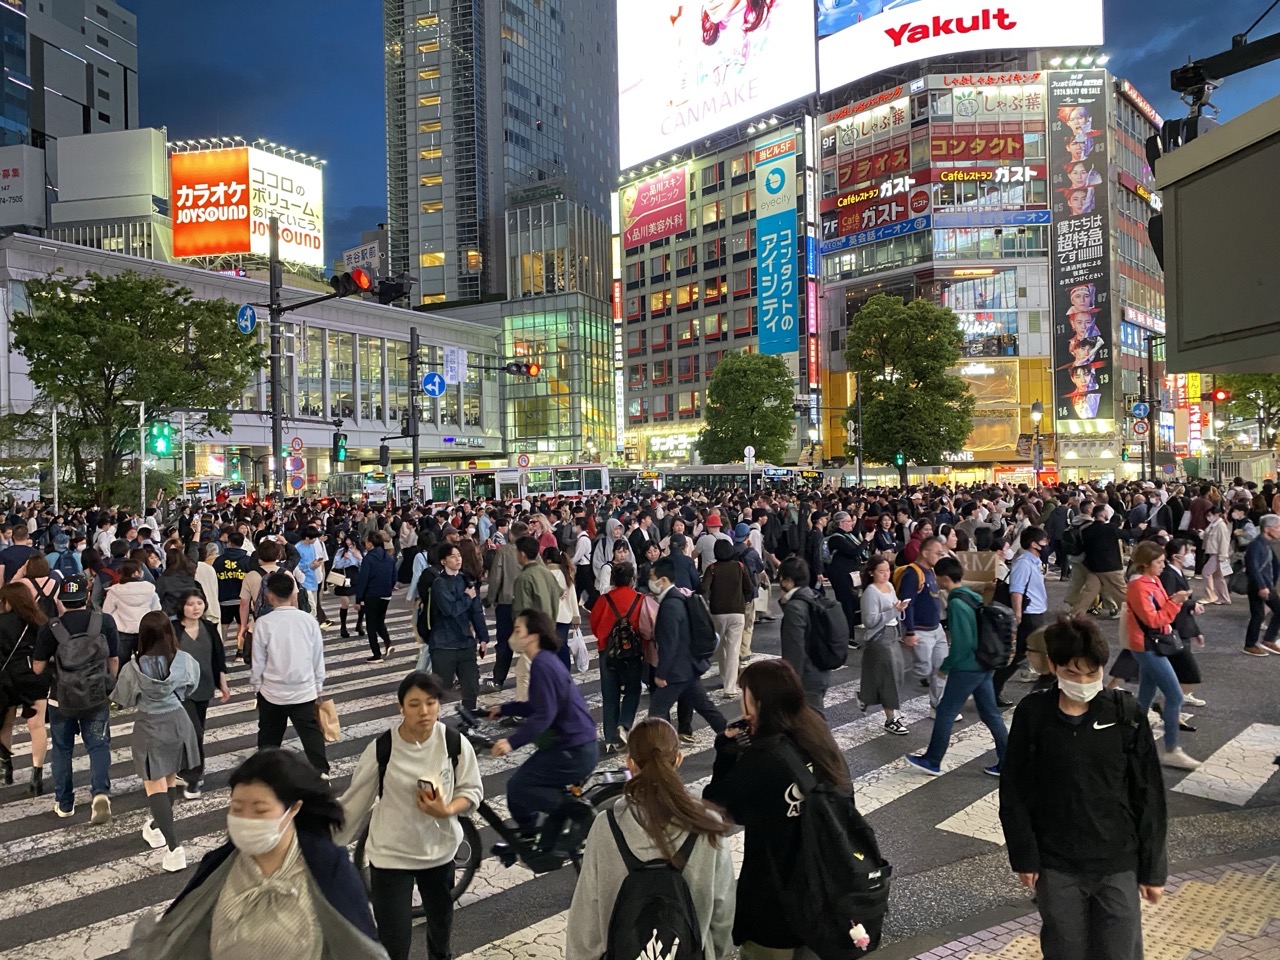 The crossing at Shibuya with loads and loads of people